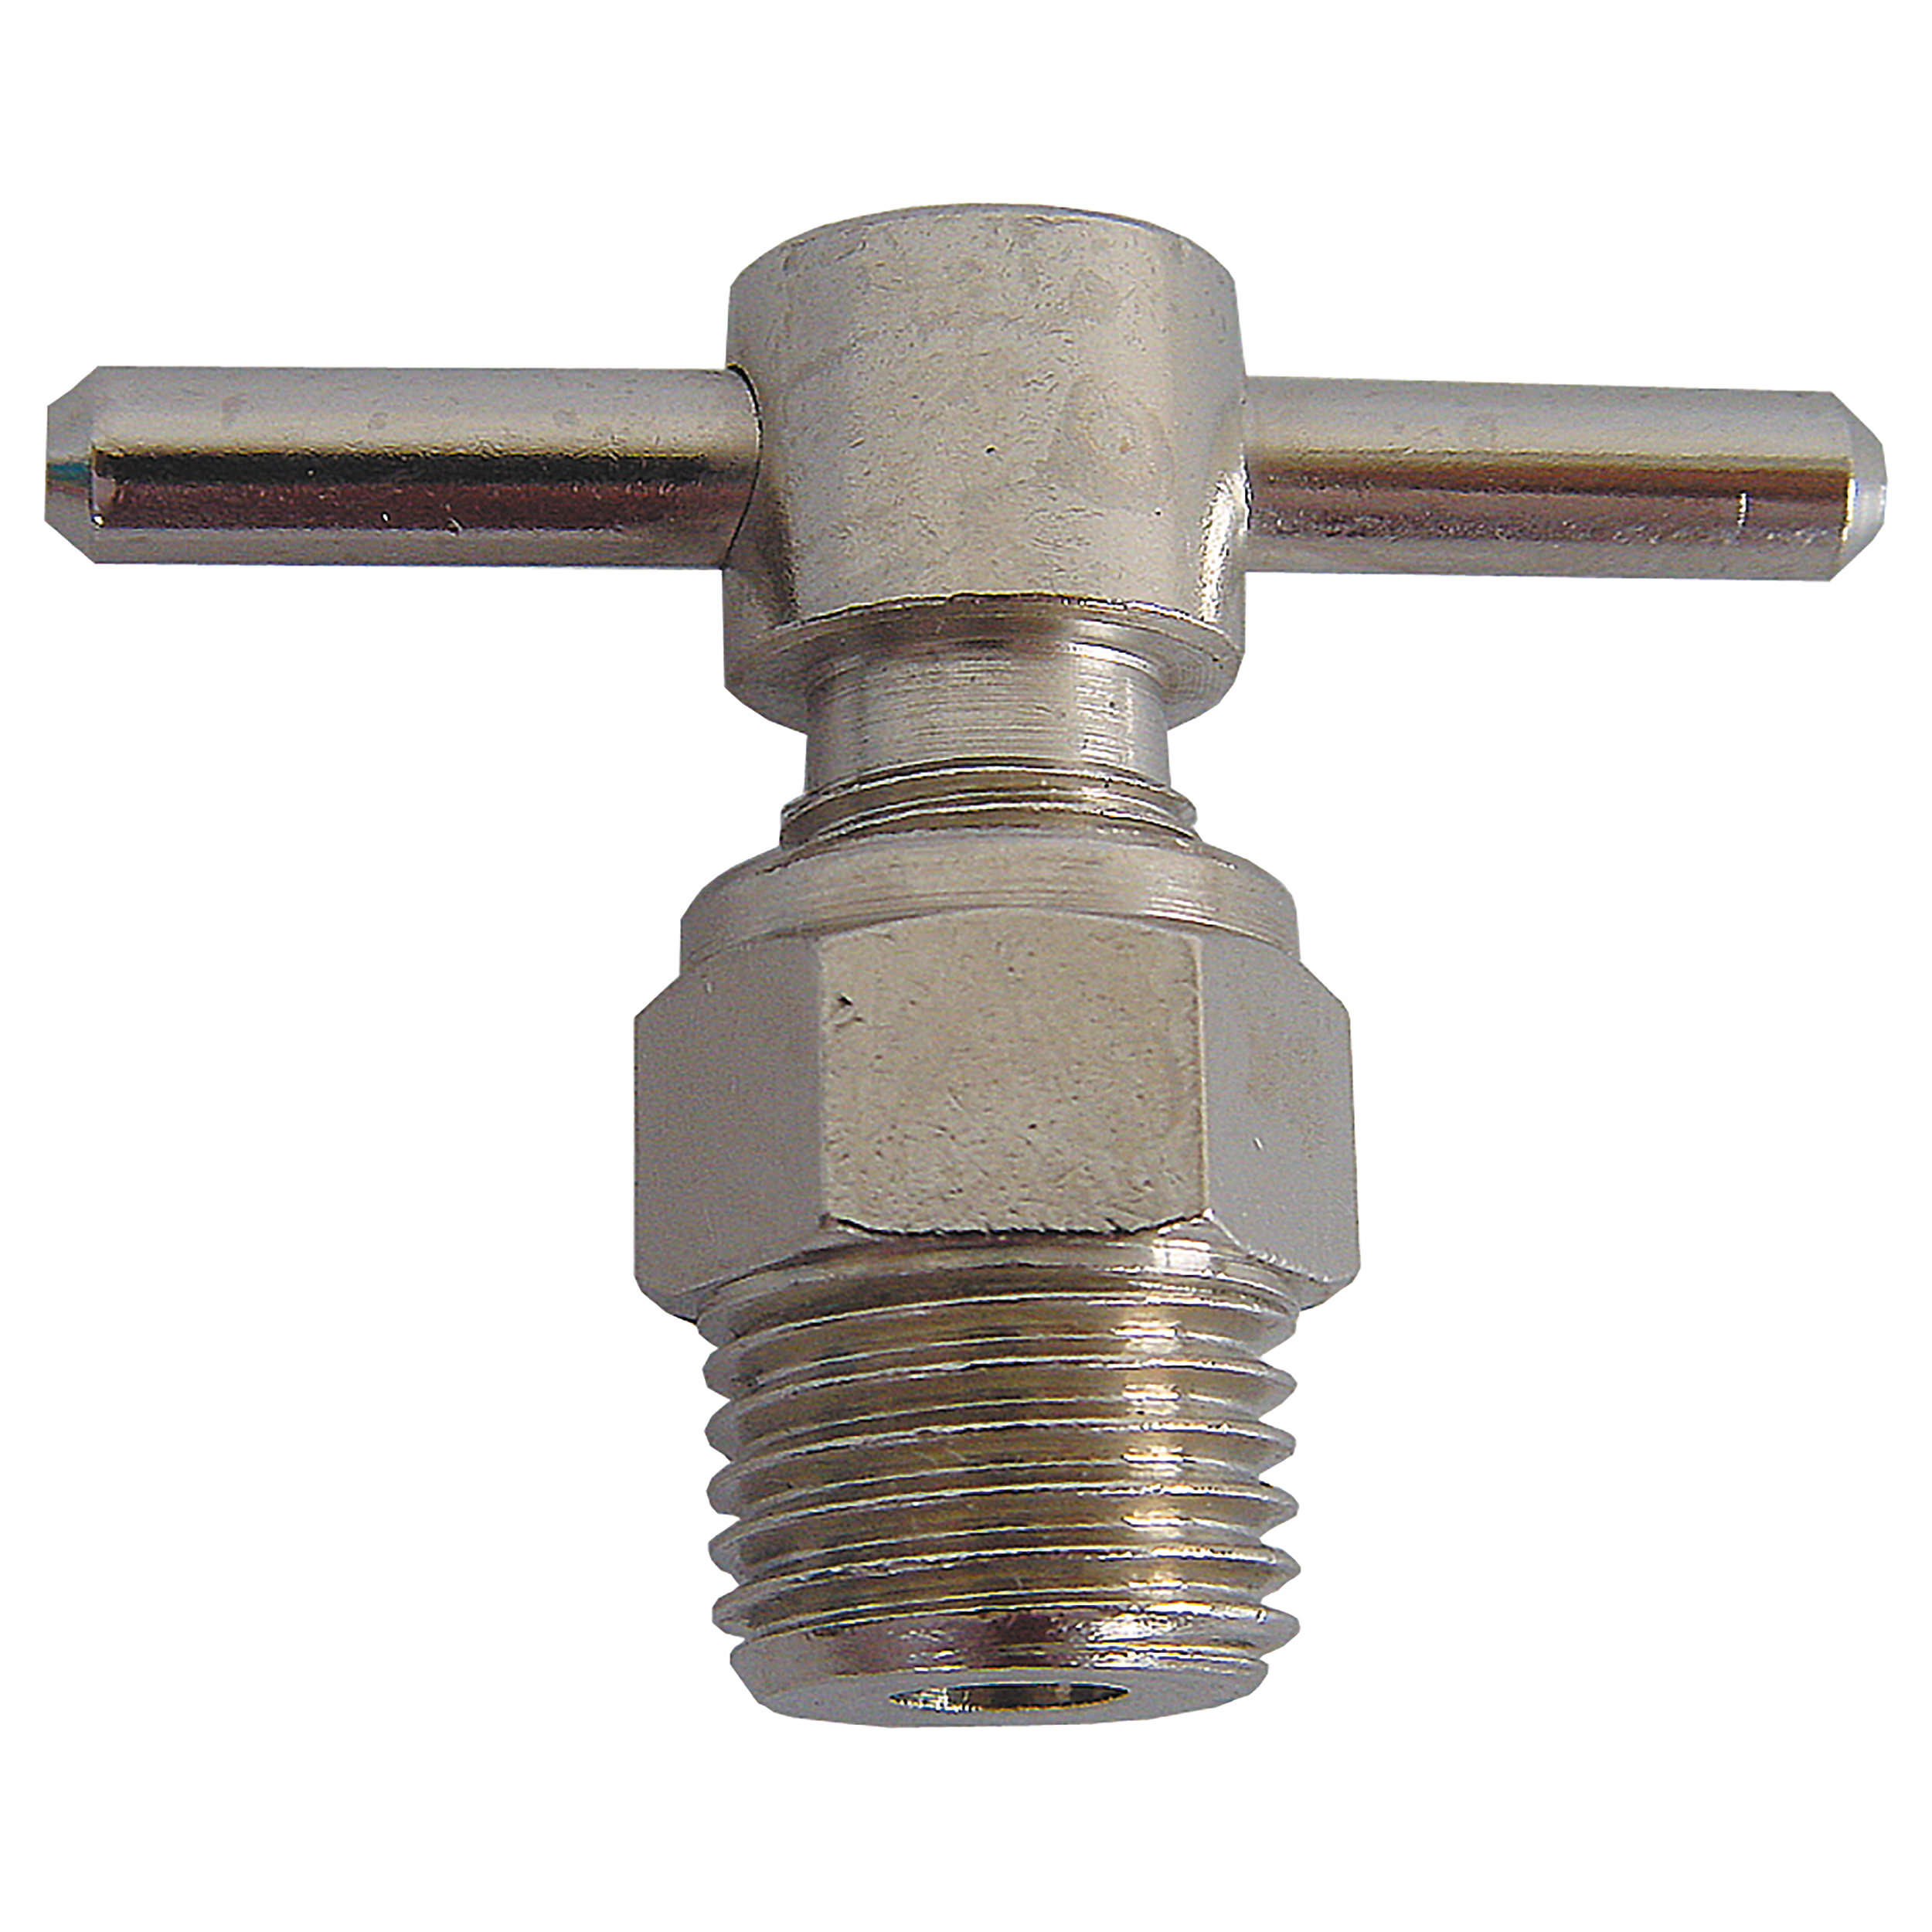 Drain valves, straight form, toggle, metal seal, nickle-plated, MOP: 362.5 psi, AF 12 mm, G⅛ male, i: 7 mm, length: 35 mm